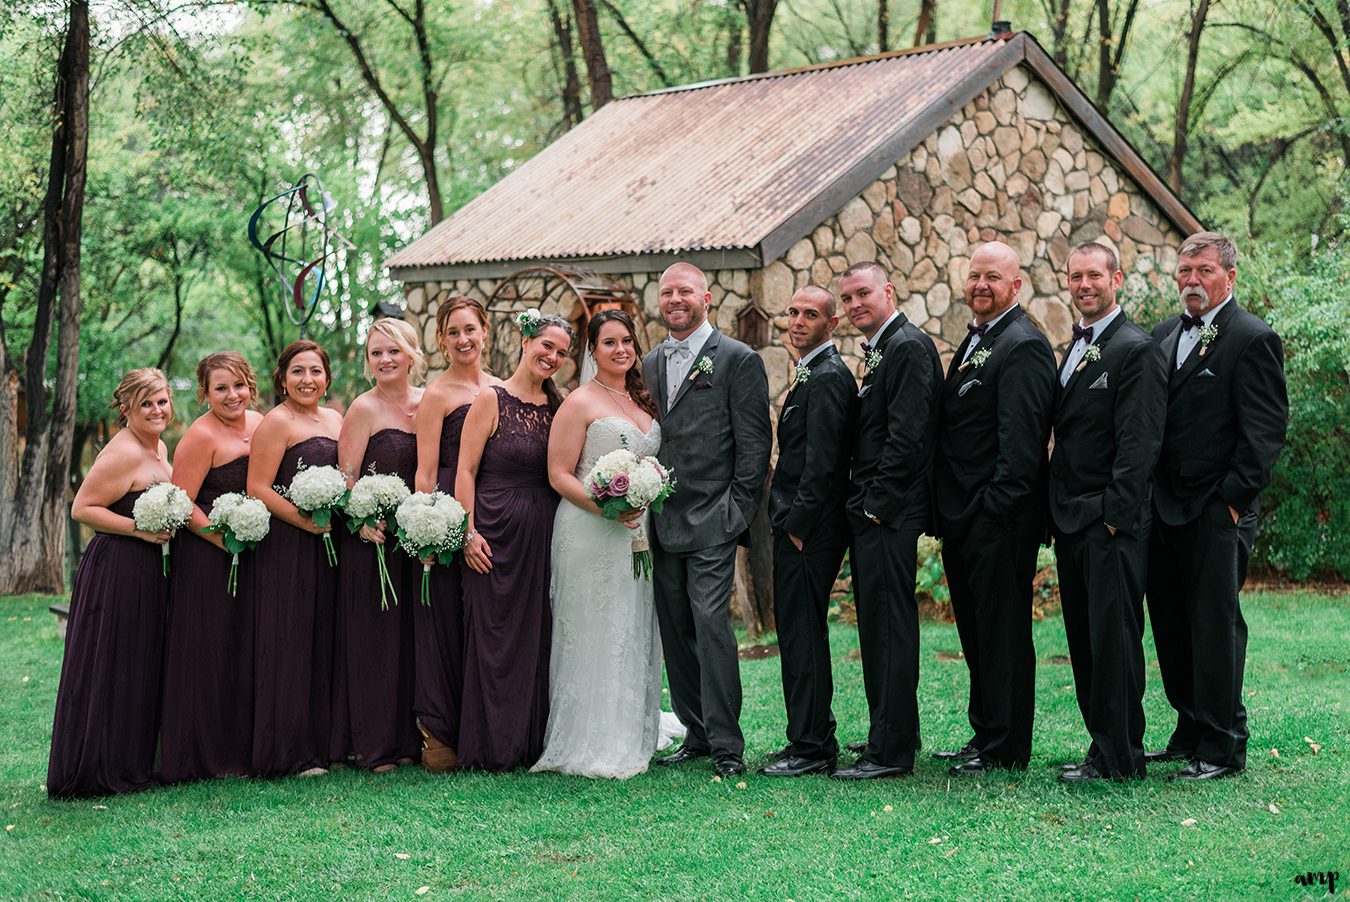 Full bridal party outside the Crack in the Wall Gallery in Silt, CO